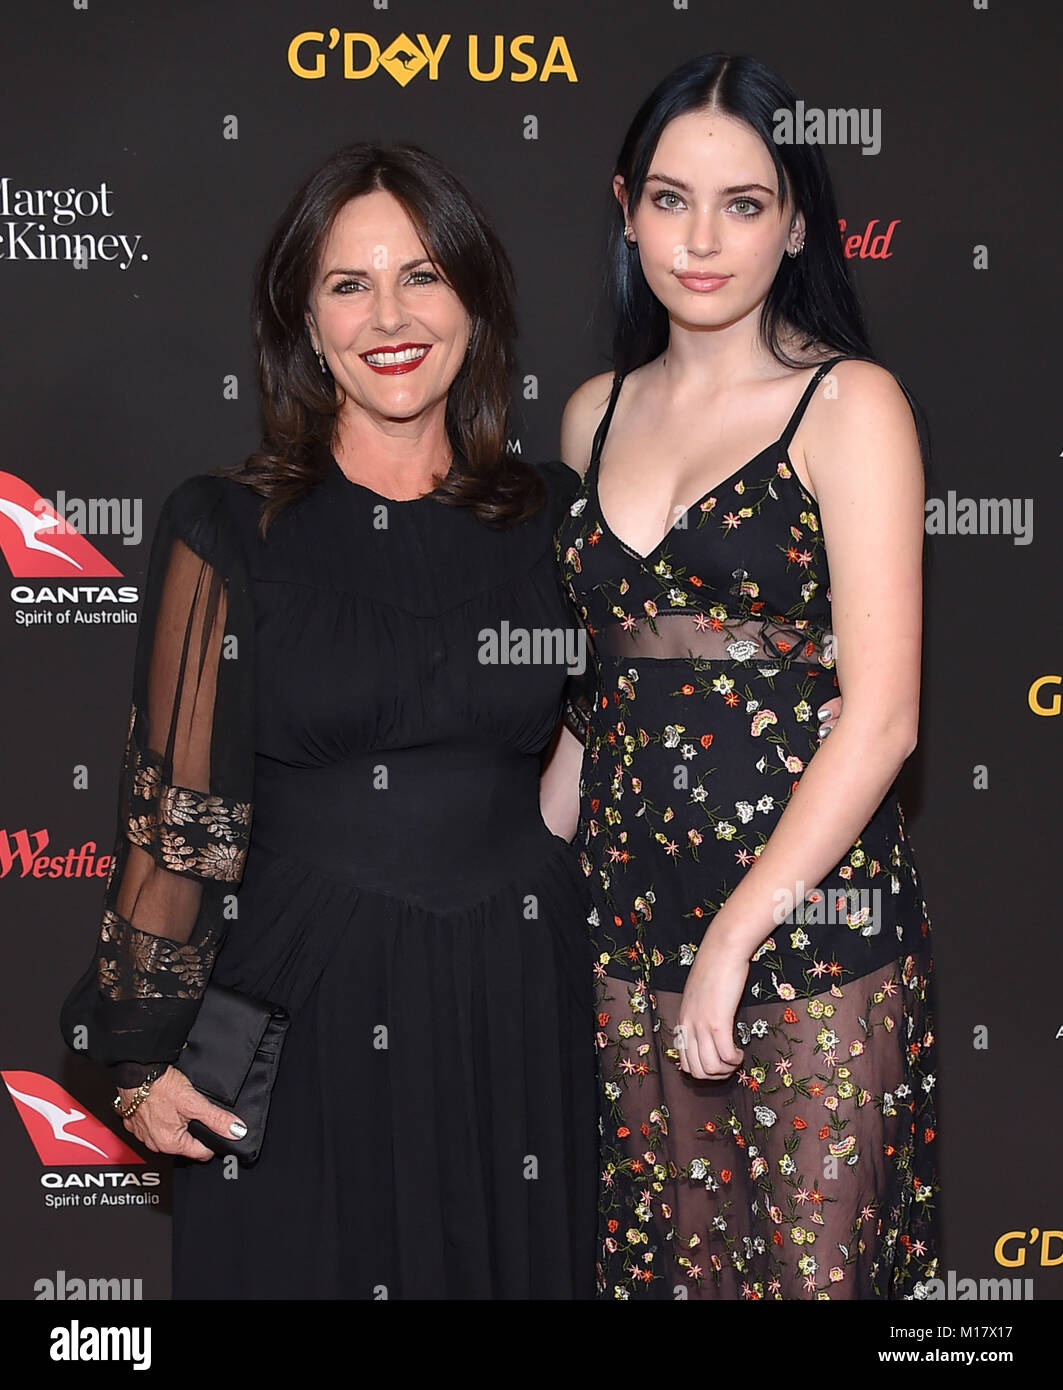 Los Angeles, California, USA. 27th Jan, 2018. Gia Carides and Bridget LaPaglia arrives for the G'Day USA Black Tie Gala 2018 at the Intercontinental Los Angeles Downtown Hotel. Credit: Lisa O'Connor/ZUMA Wire/Alamy Live News Stock Photo